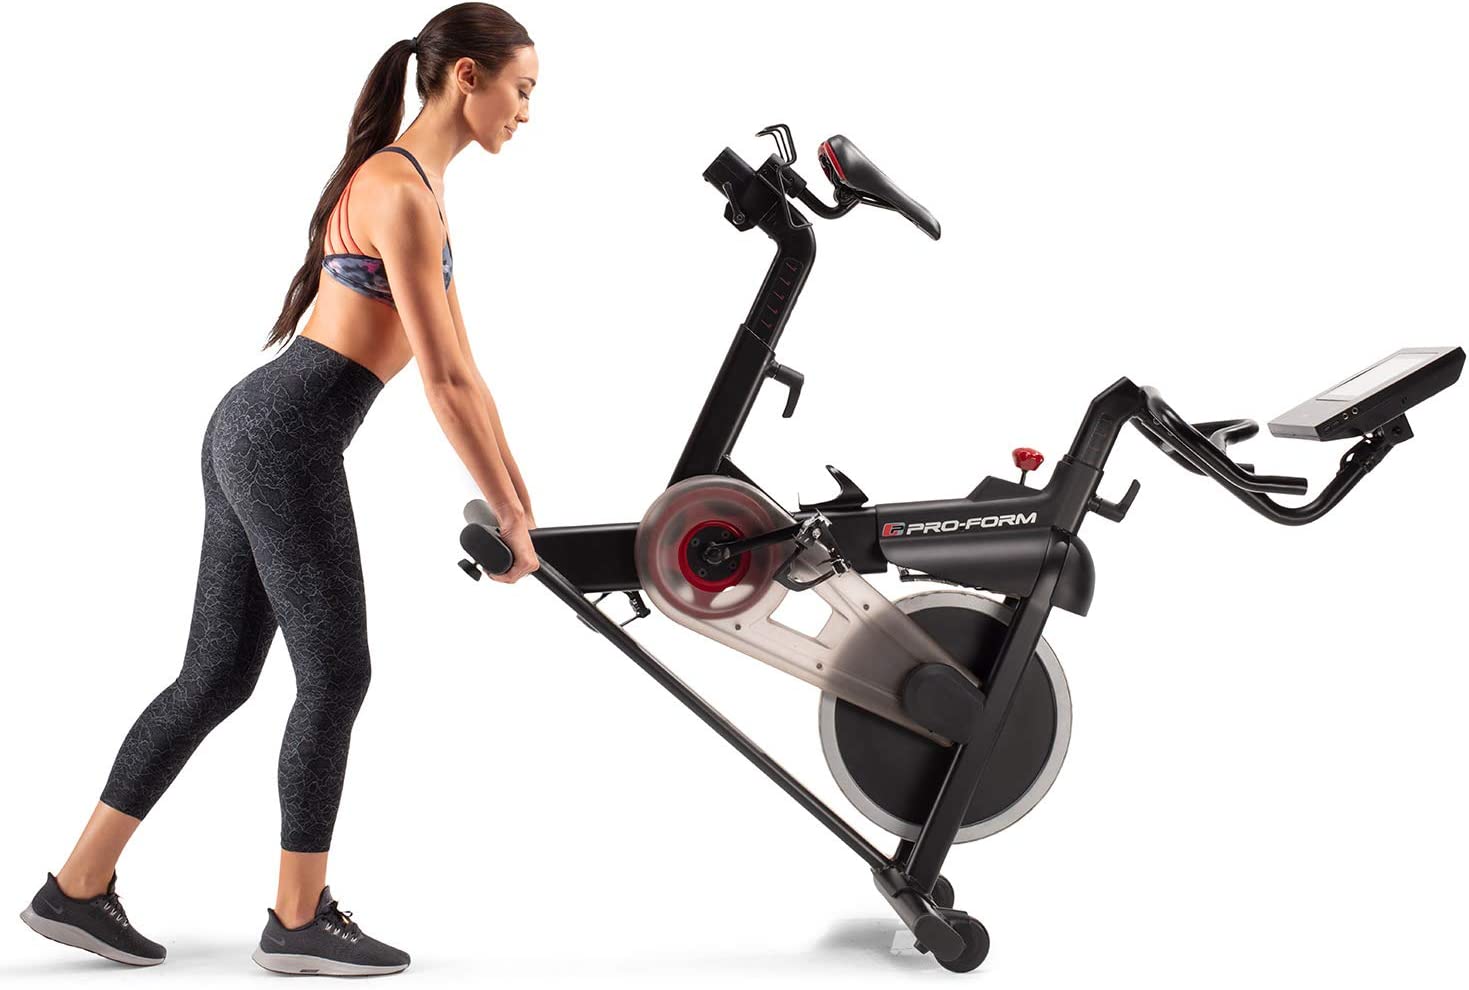 Proform Smart Power 10.0 Exercise Bike - with a female model moving it